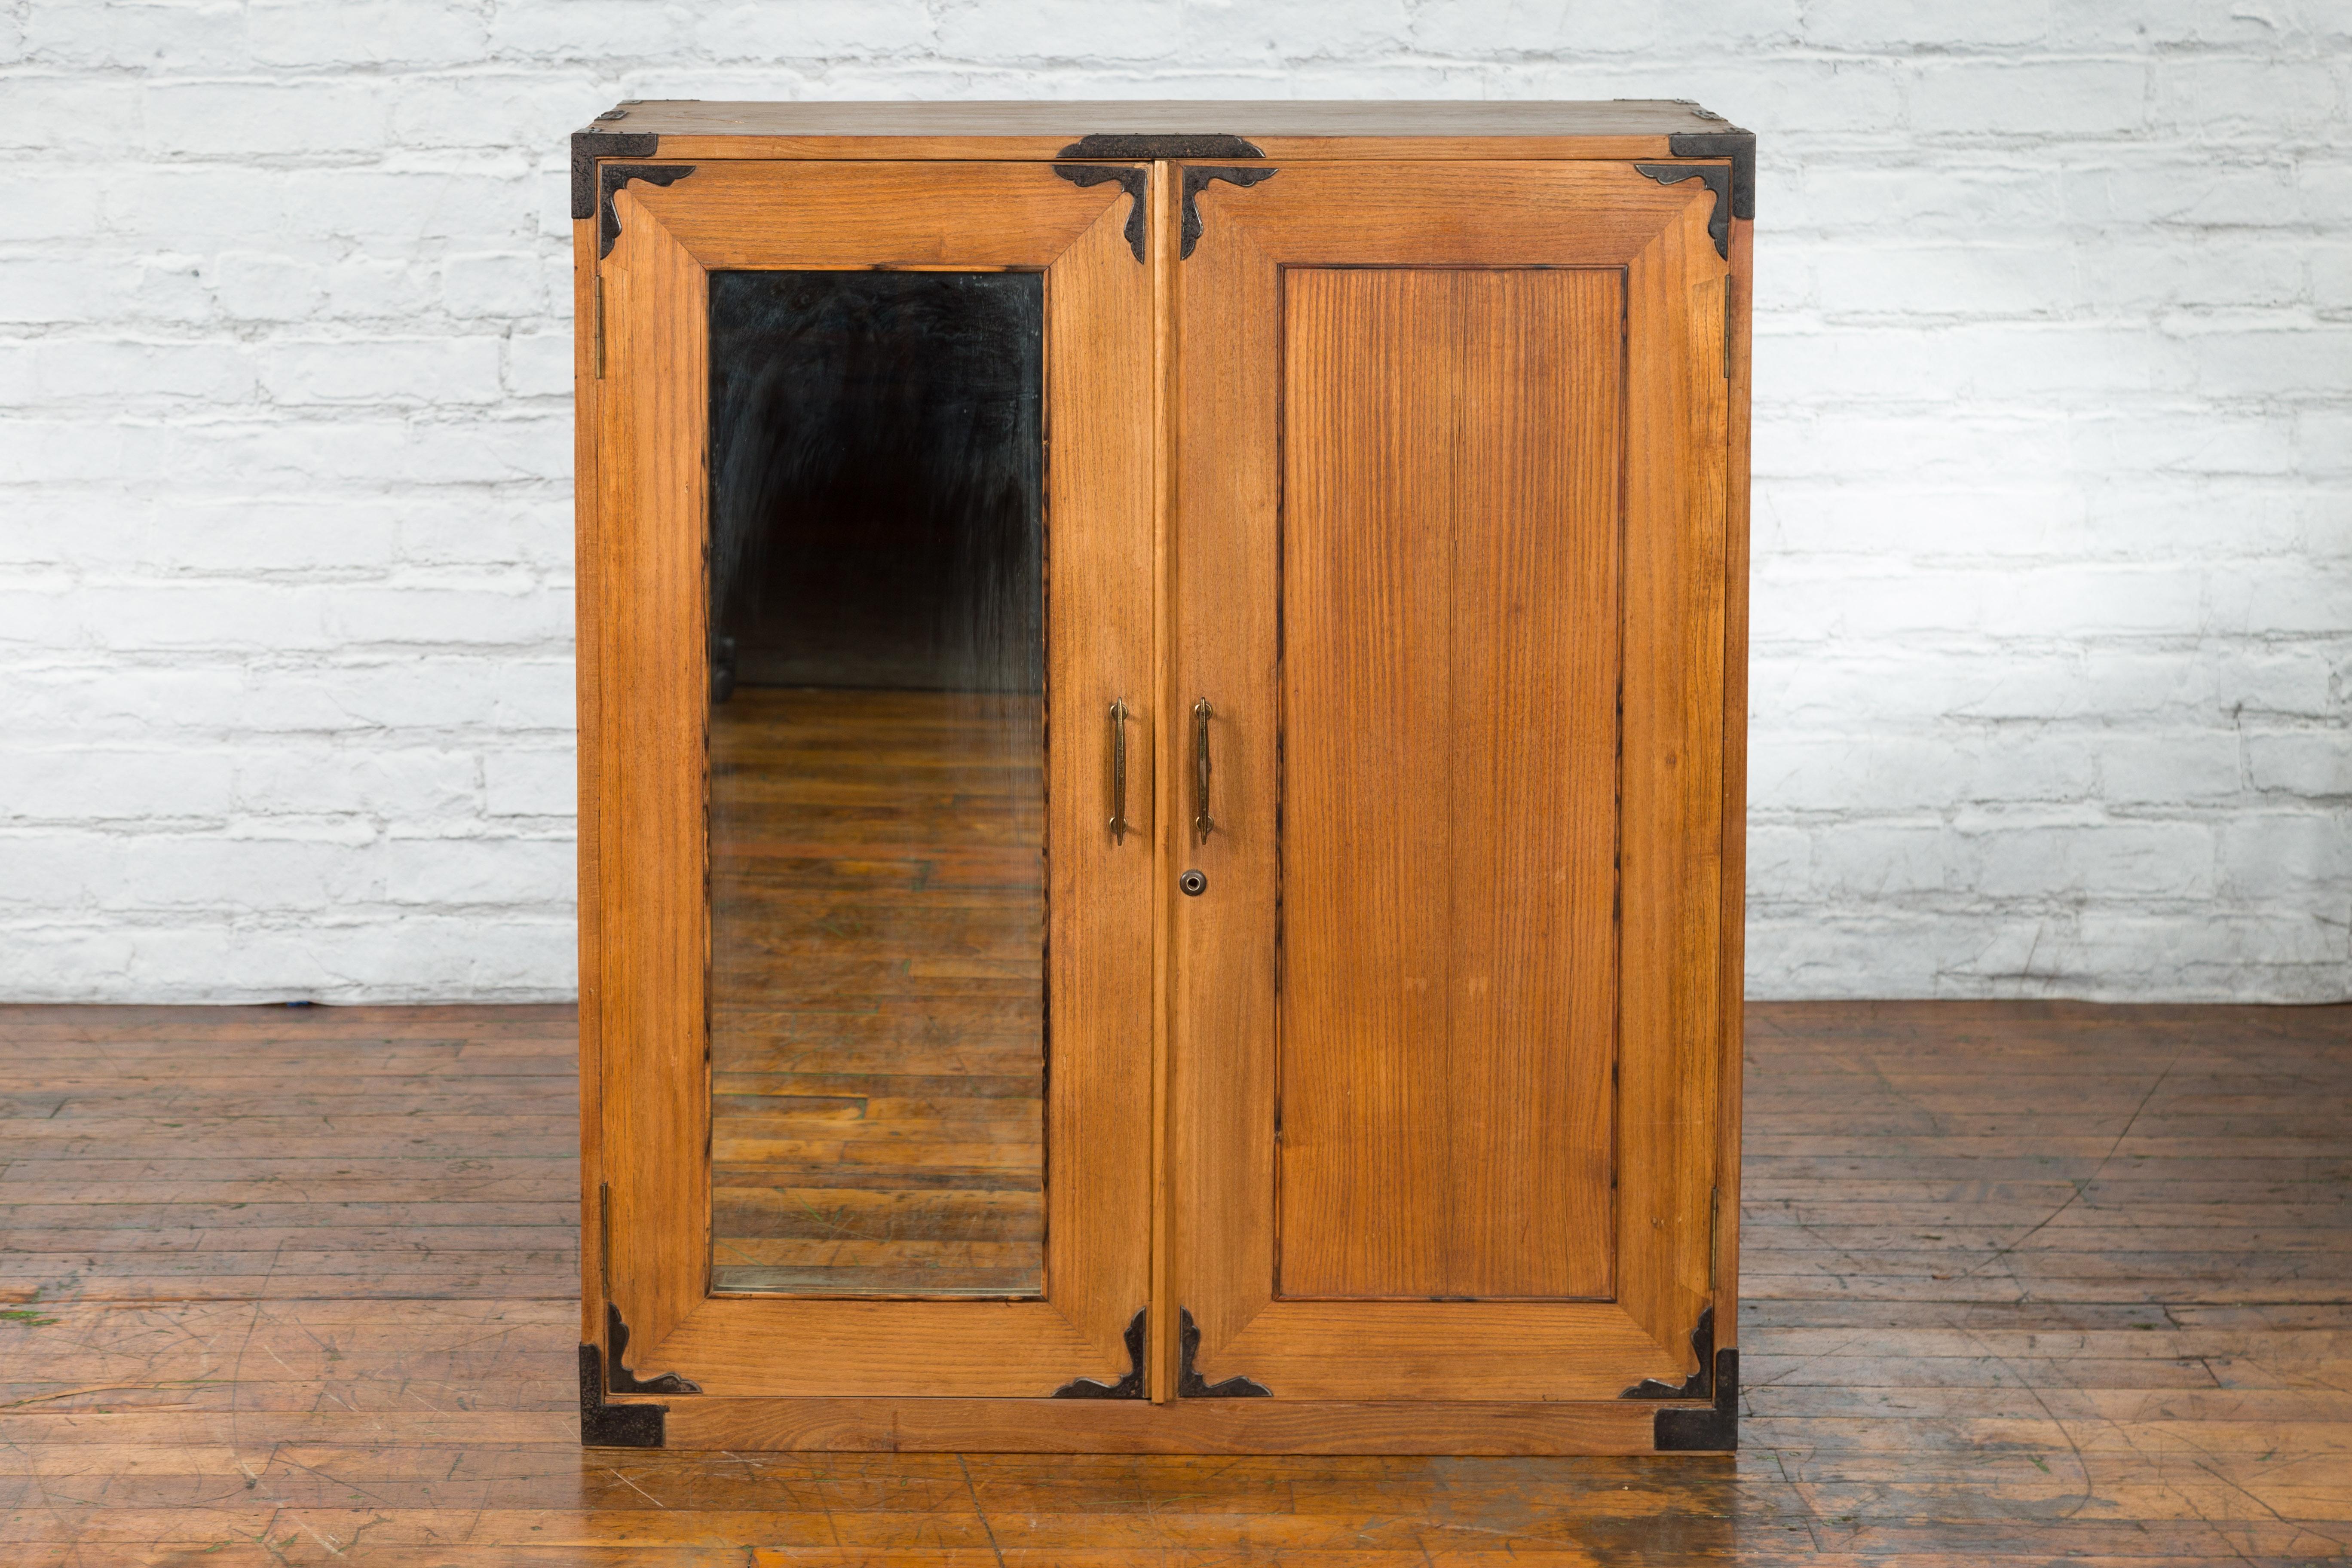 An antique Japanese Tansu clothing cabinet from the early 20th century, with mirrored door and iron hardware. Created in Japan during the early years of the 20th century, this tansu cabinet features a rectangular top with iron braces, sitting above